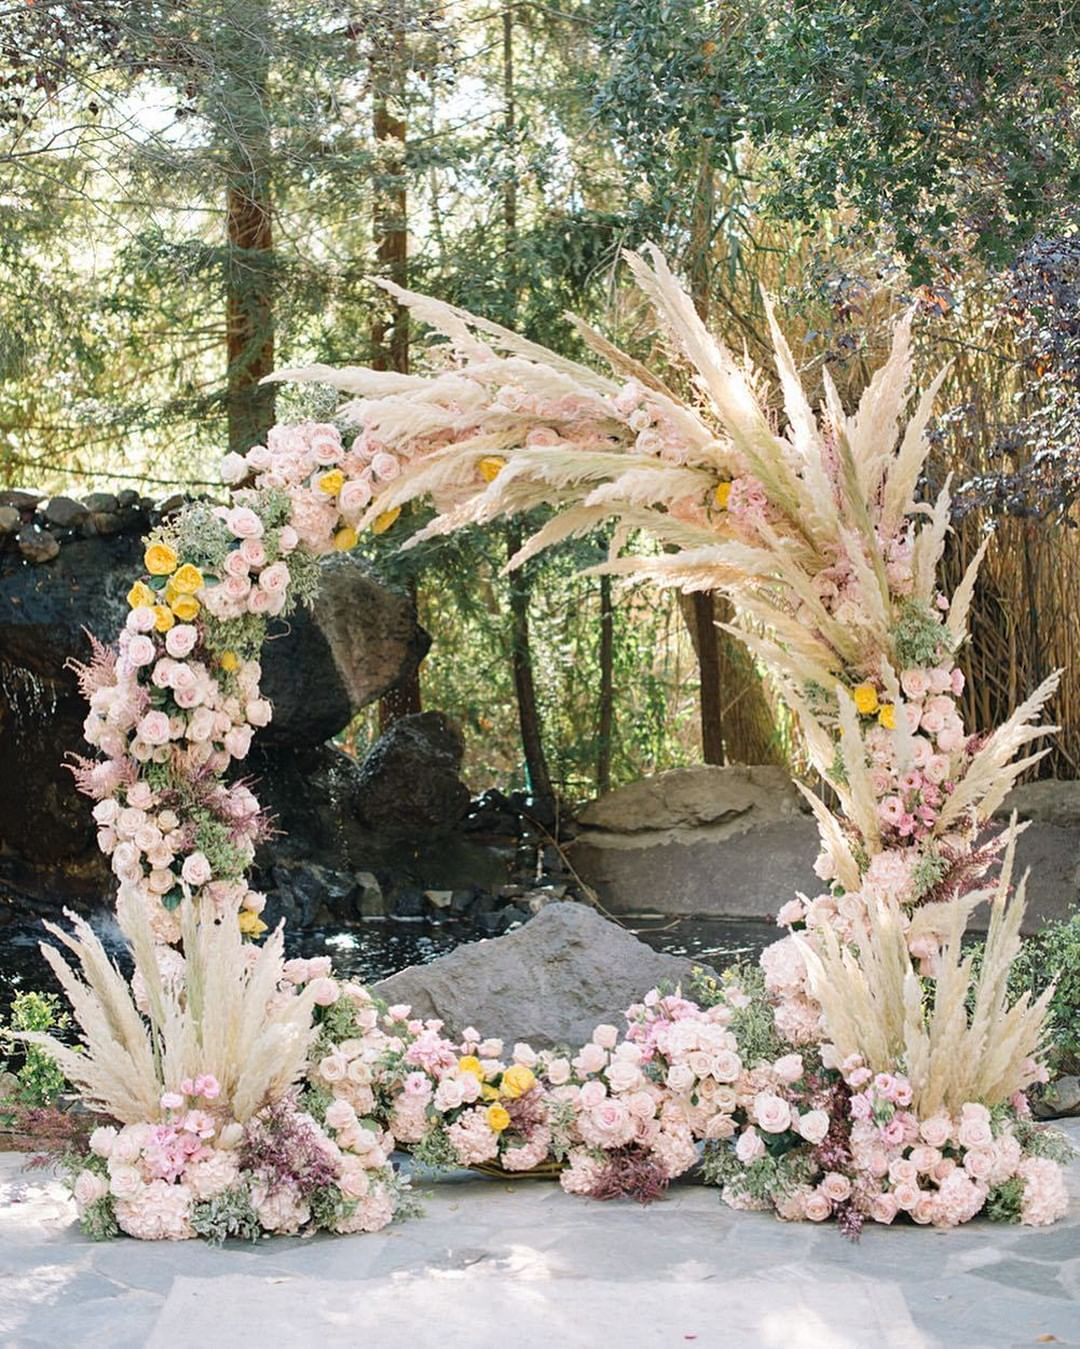 Circular wedding ceremony arch with blush flowers and pampas grass accents.